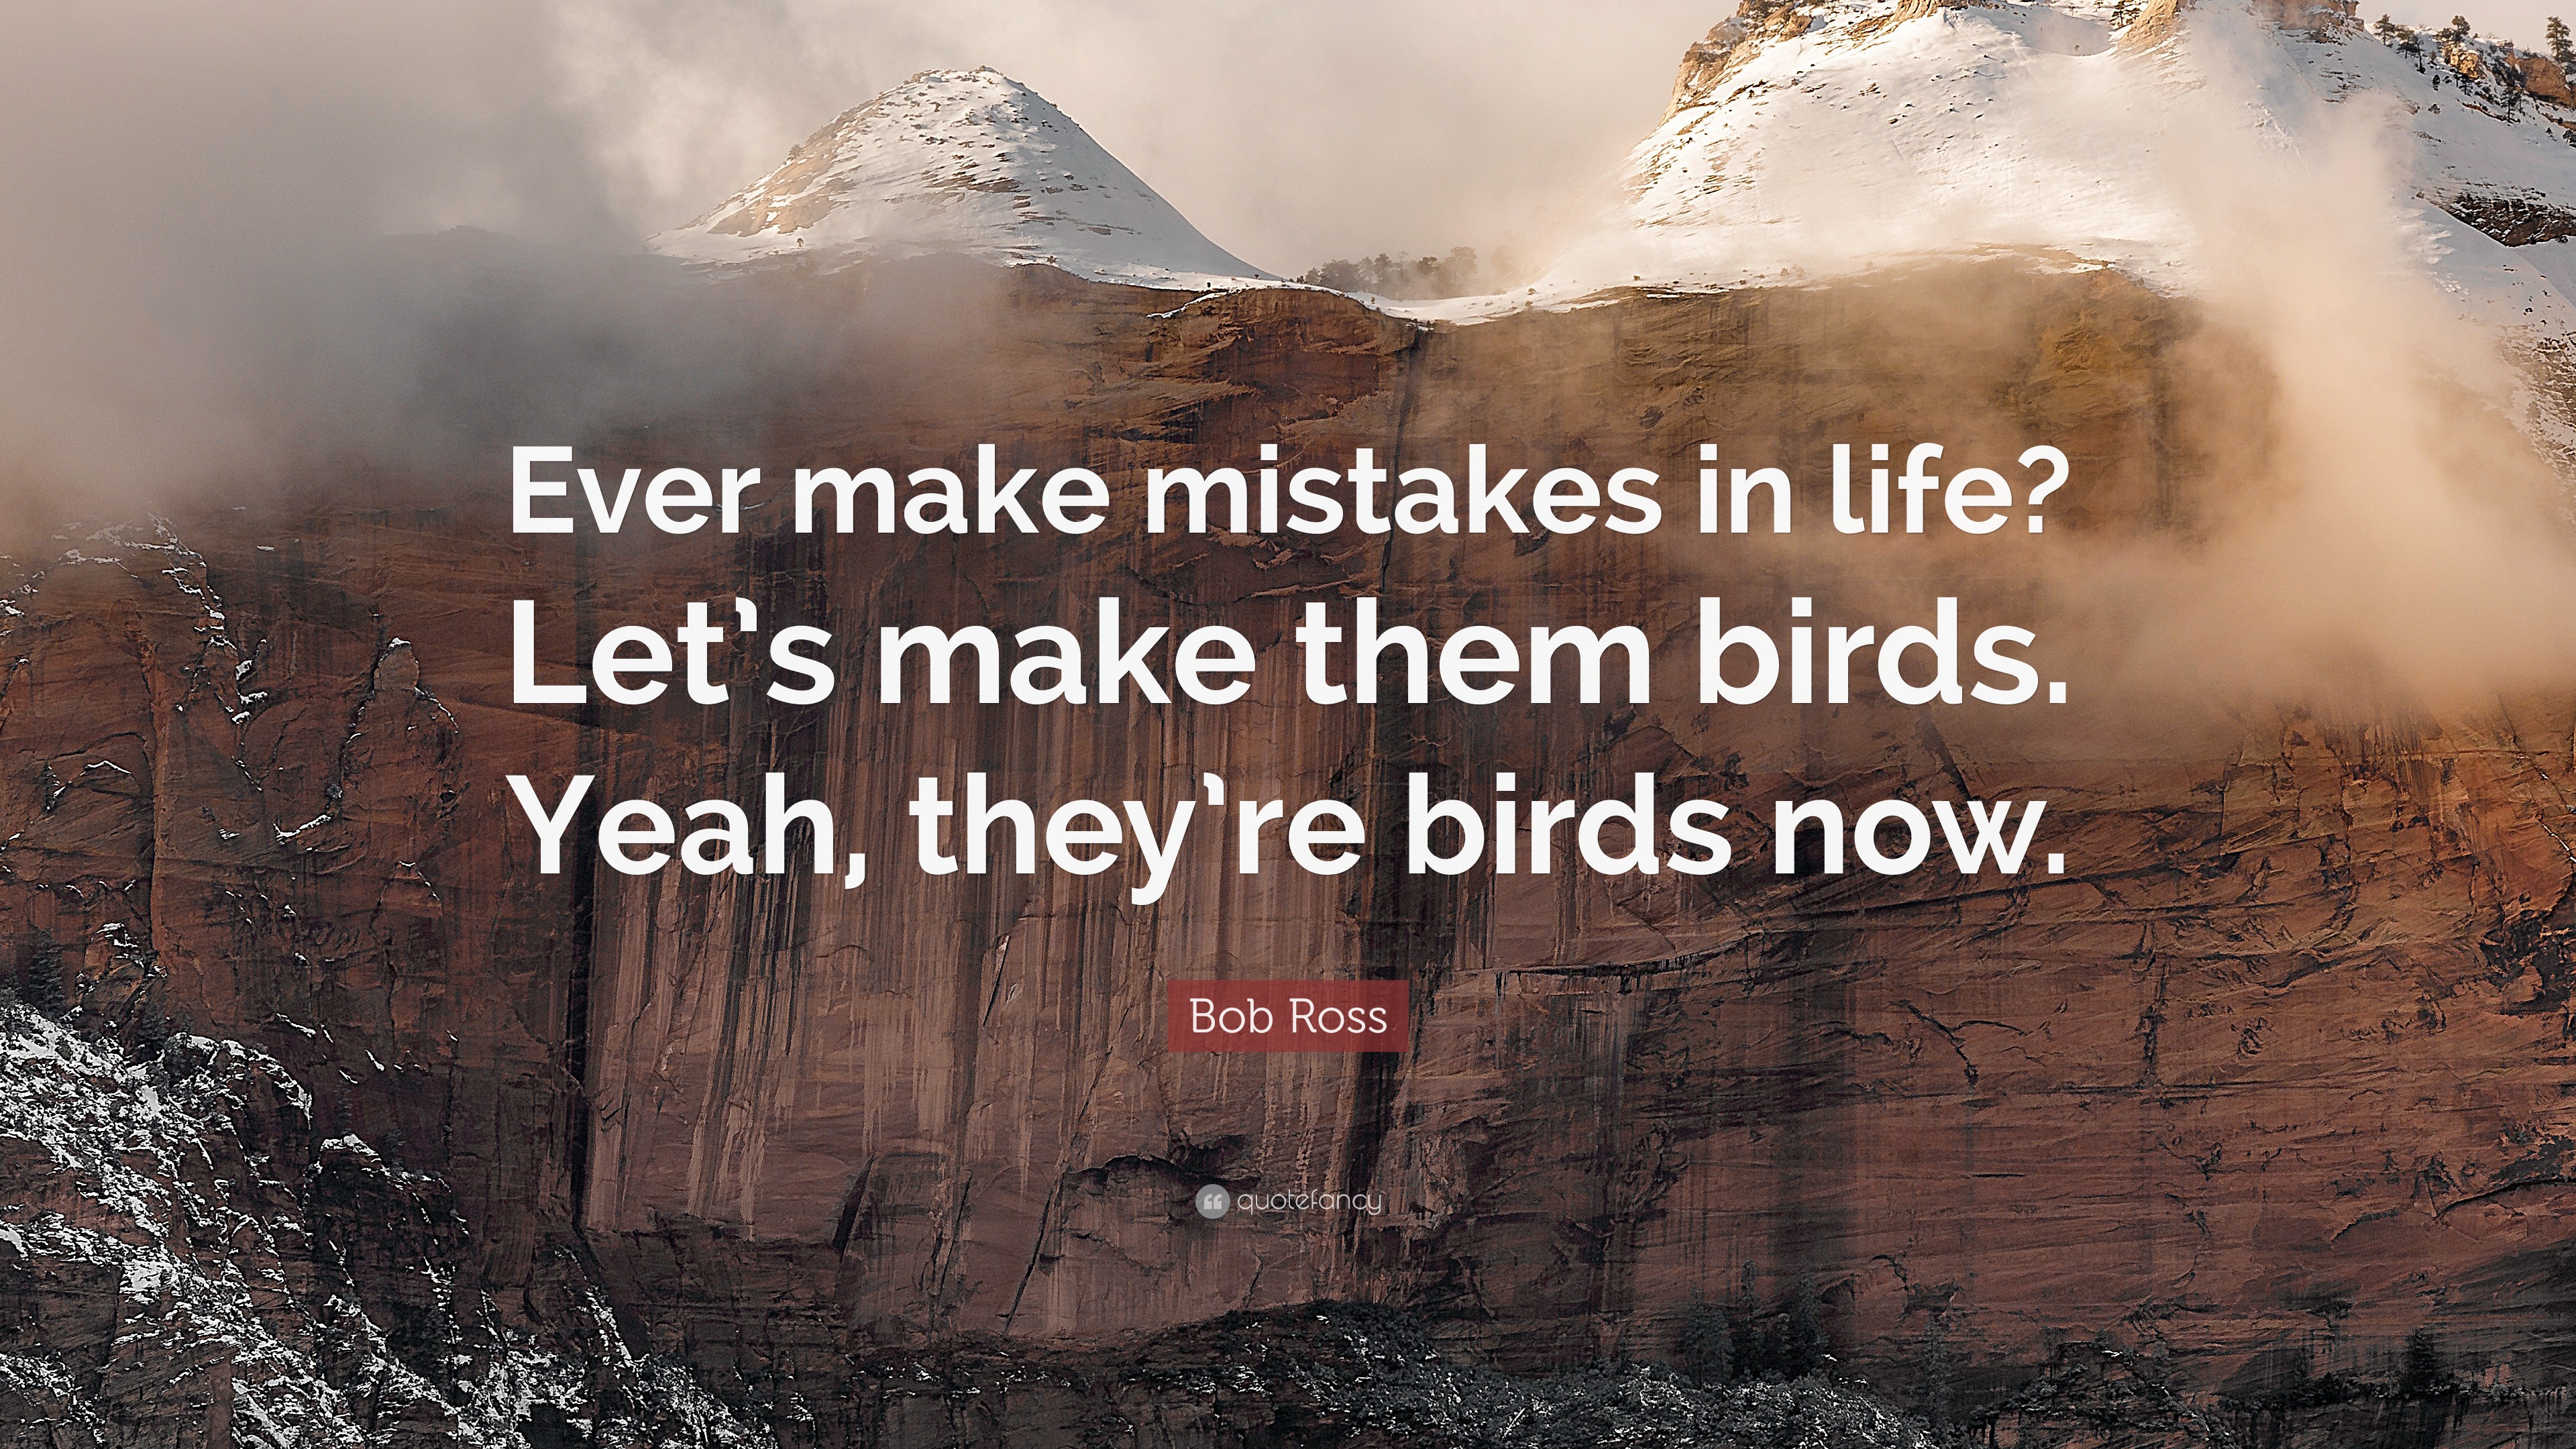 Bob Ross Quote: “Ever make mistakes in life? Let’s make them birds